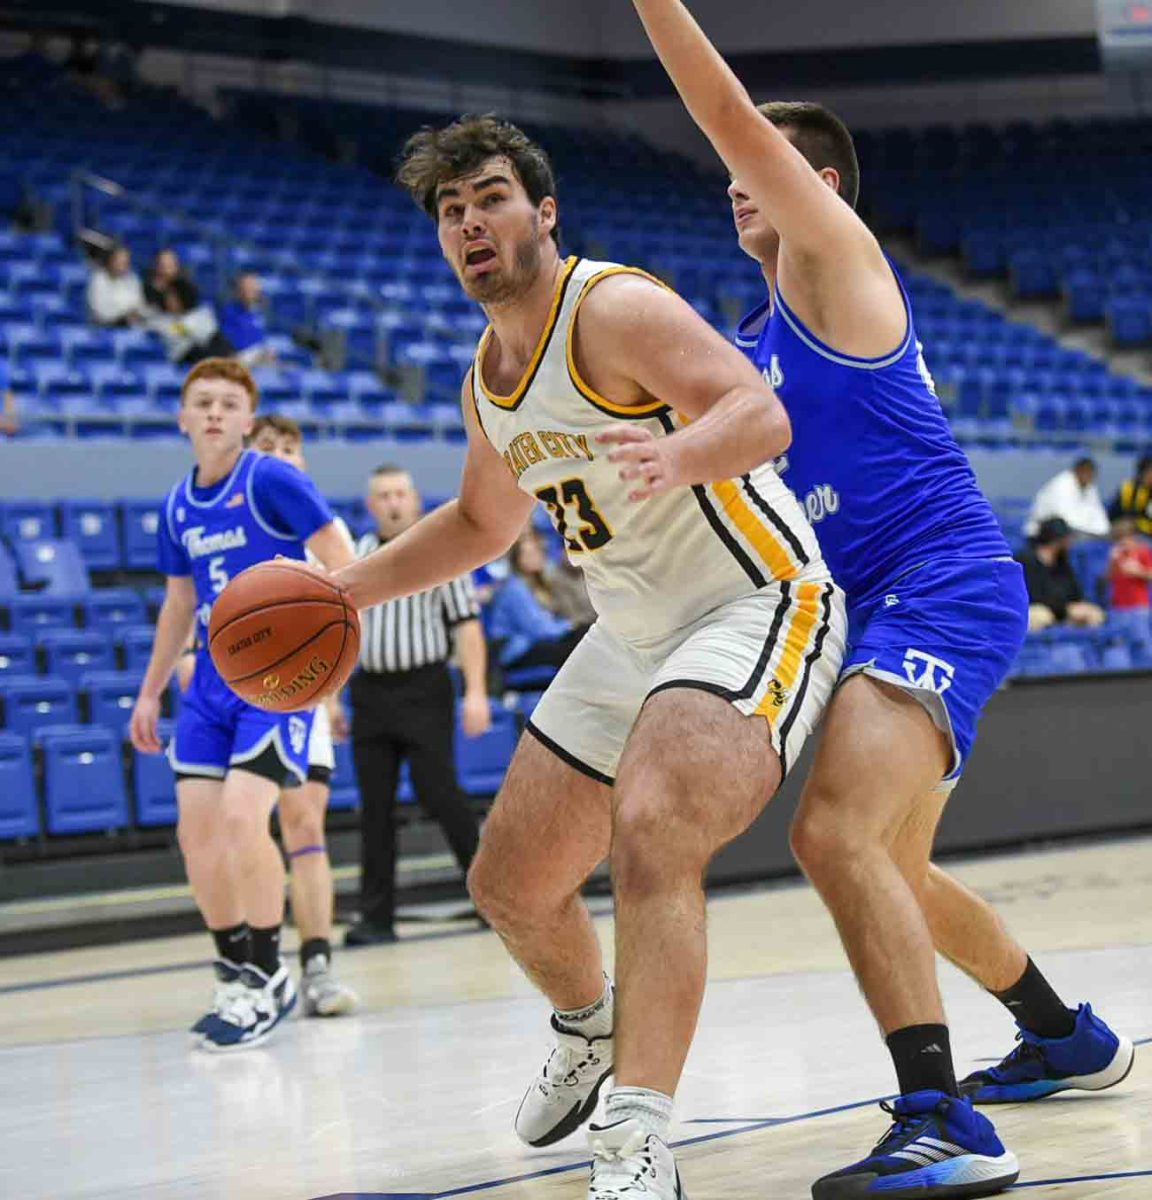 Middlesboro senior forward Trey King had 18 points and six rebounds in the Yellow Jackets win over Thomas Walker, Va., on Saturday at Lincoln Memorial University.